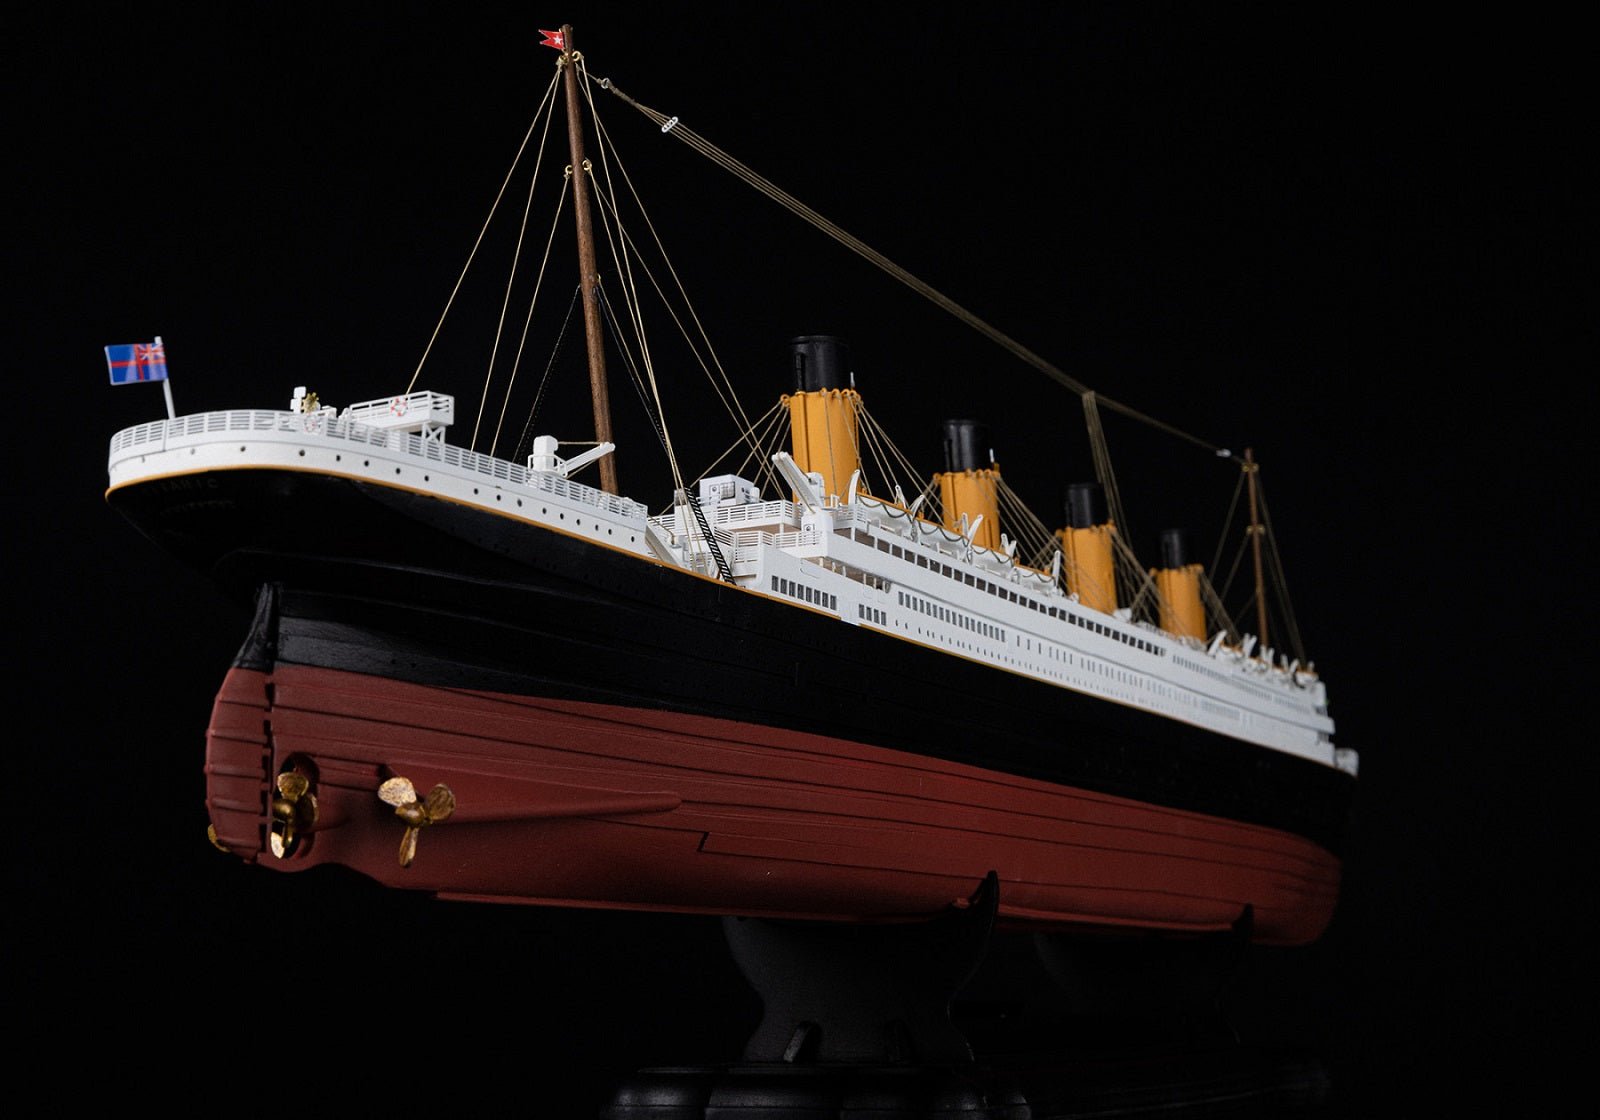 OcCre® RMS Titanic Wooden Model Ship Kit, 1/300 Scale - Micro - Mark Scale Model Kits